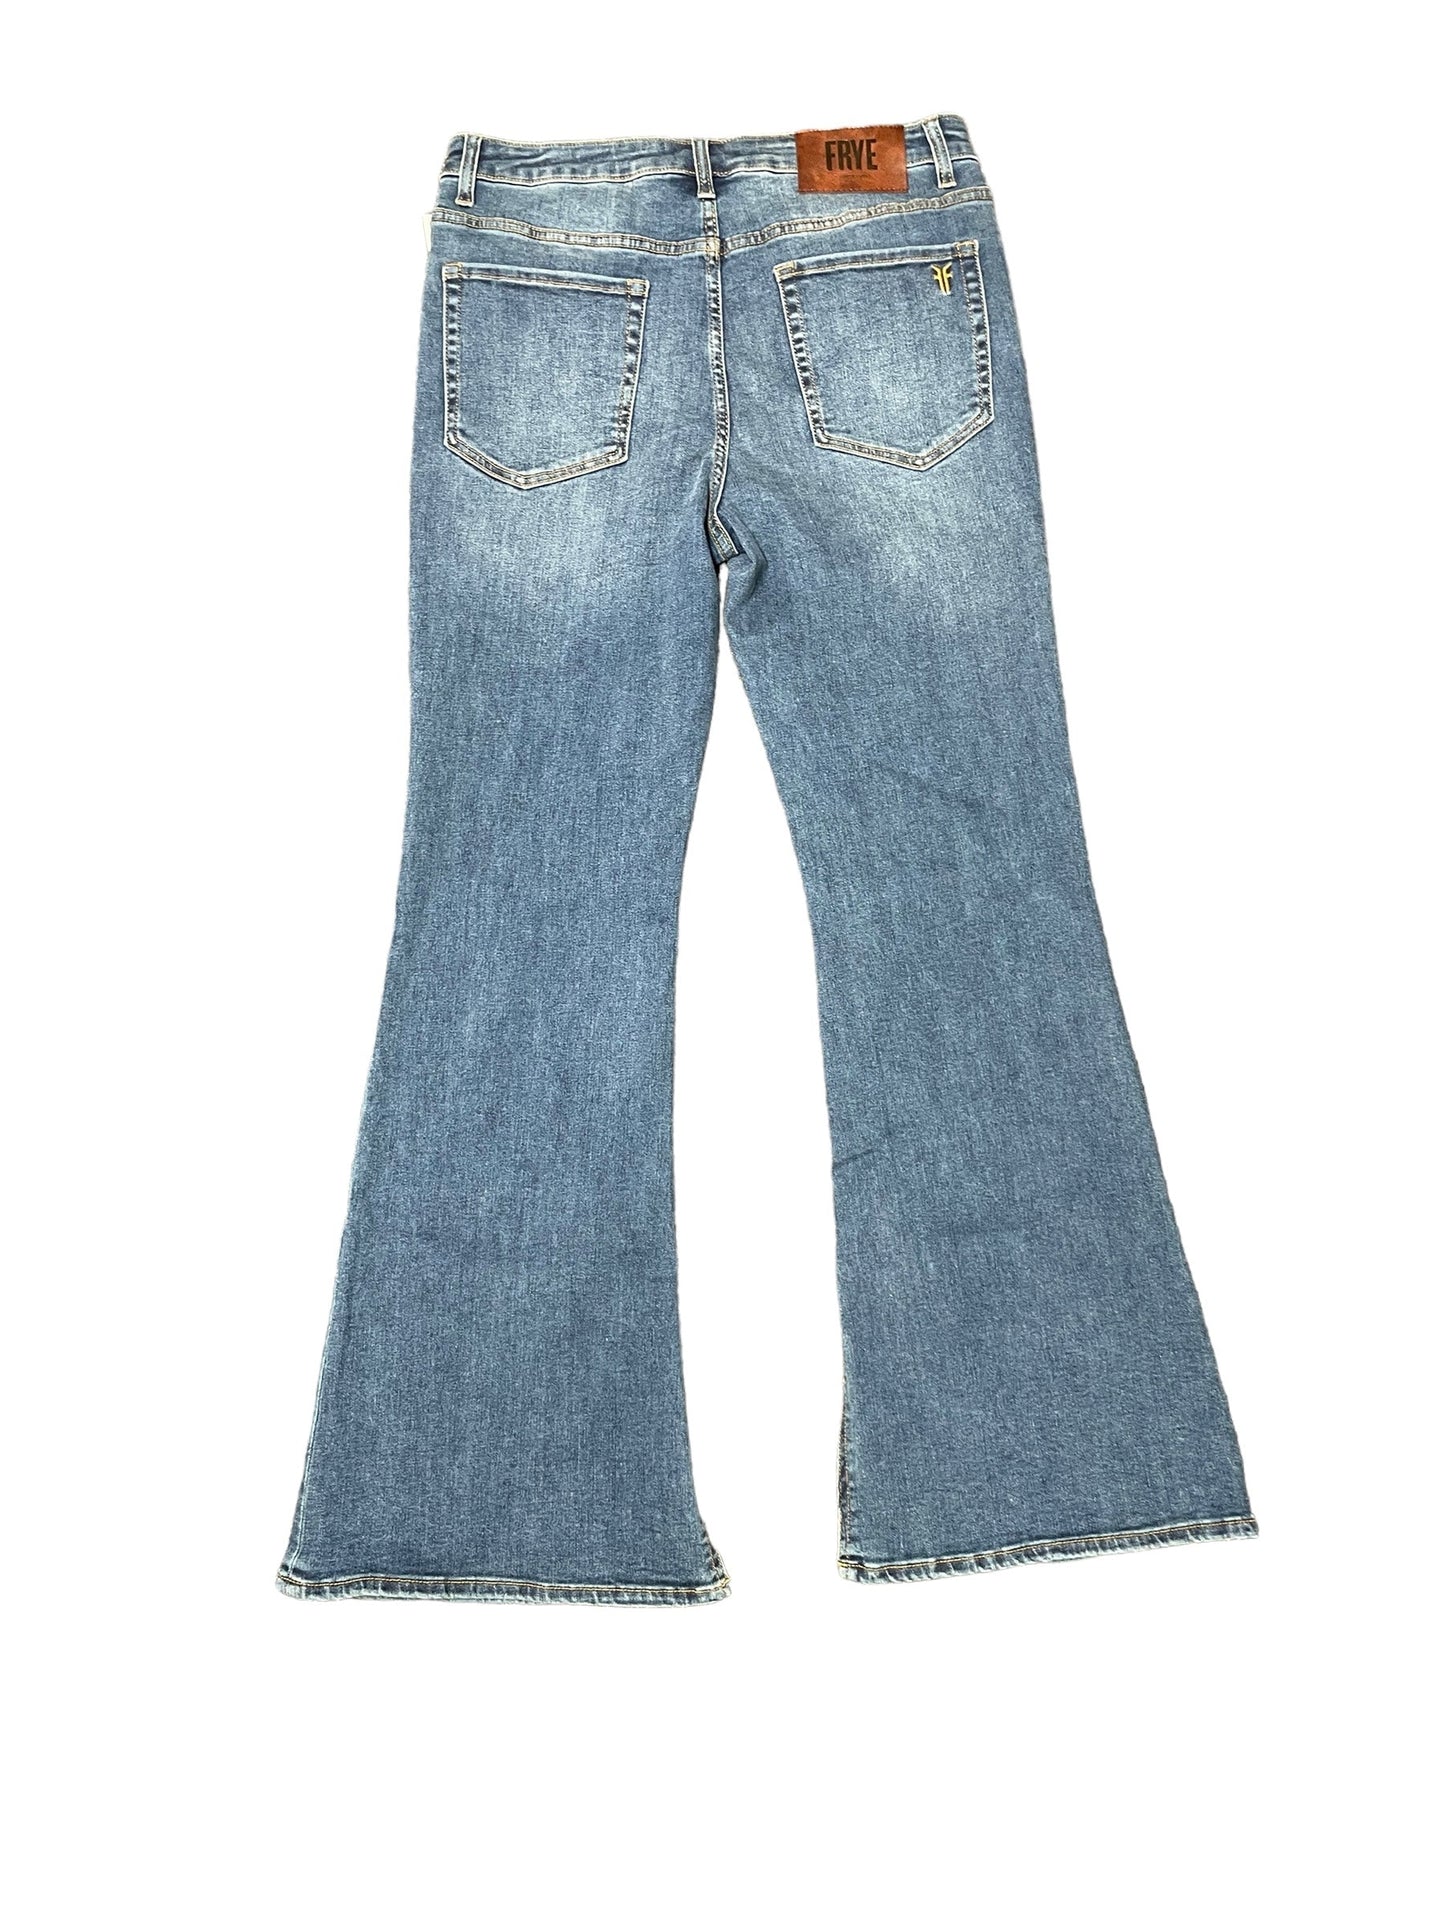 Jeans Flared By Frye  Size: 12